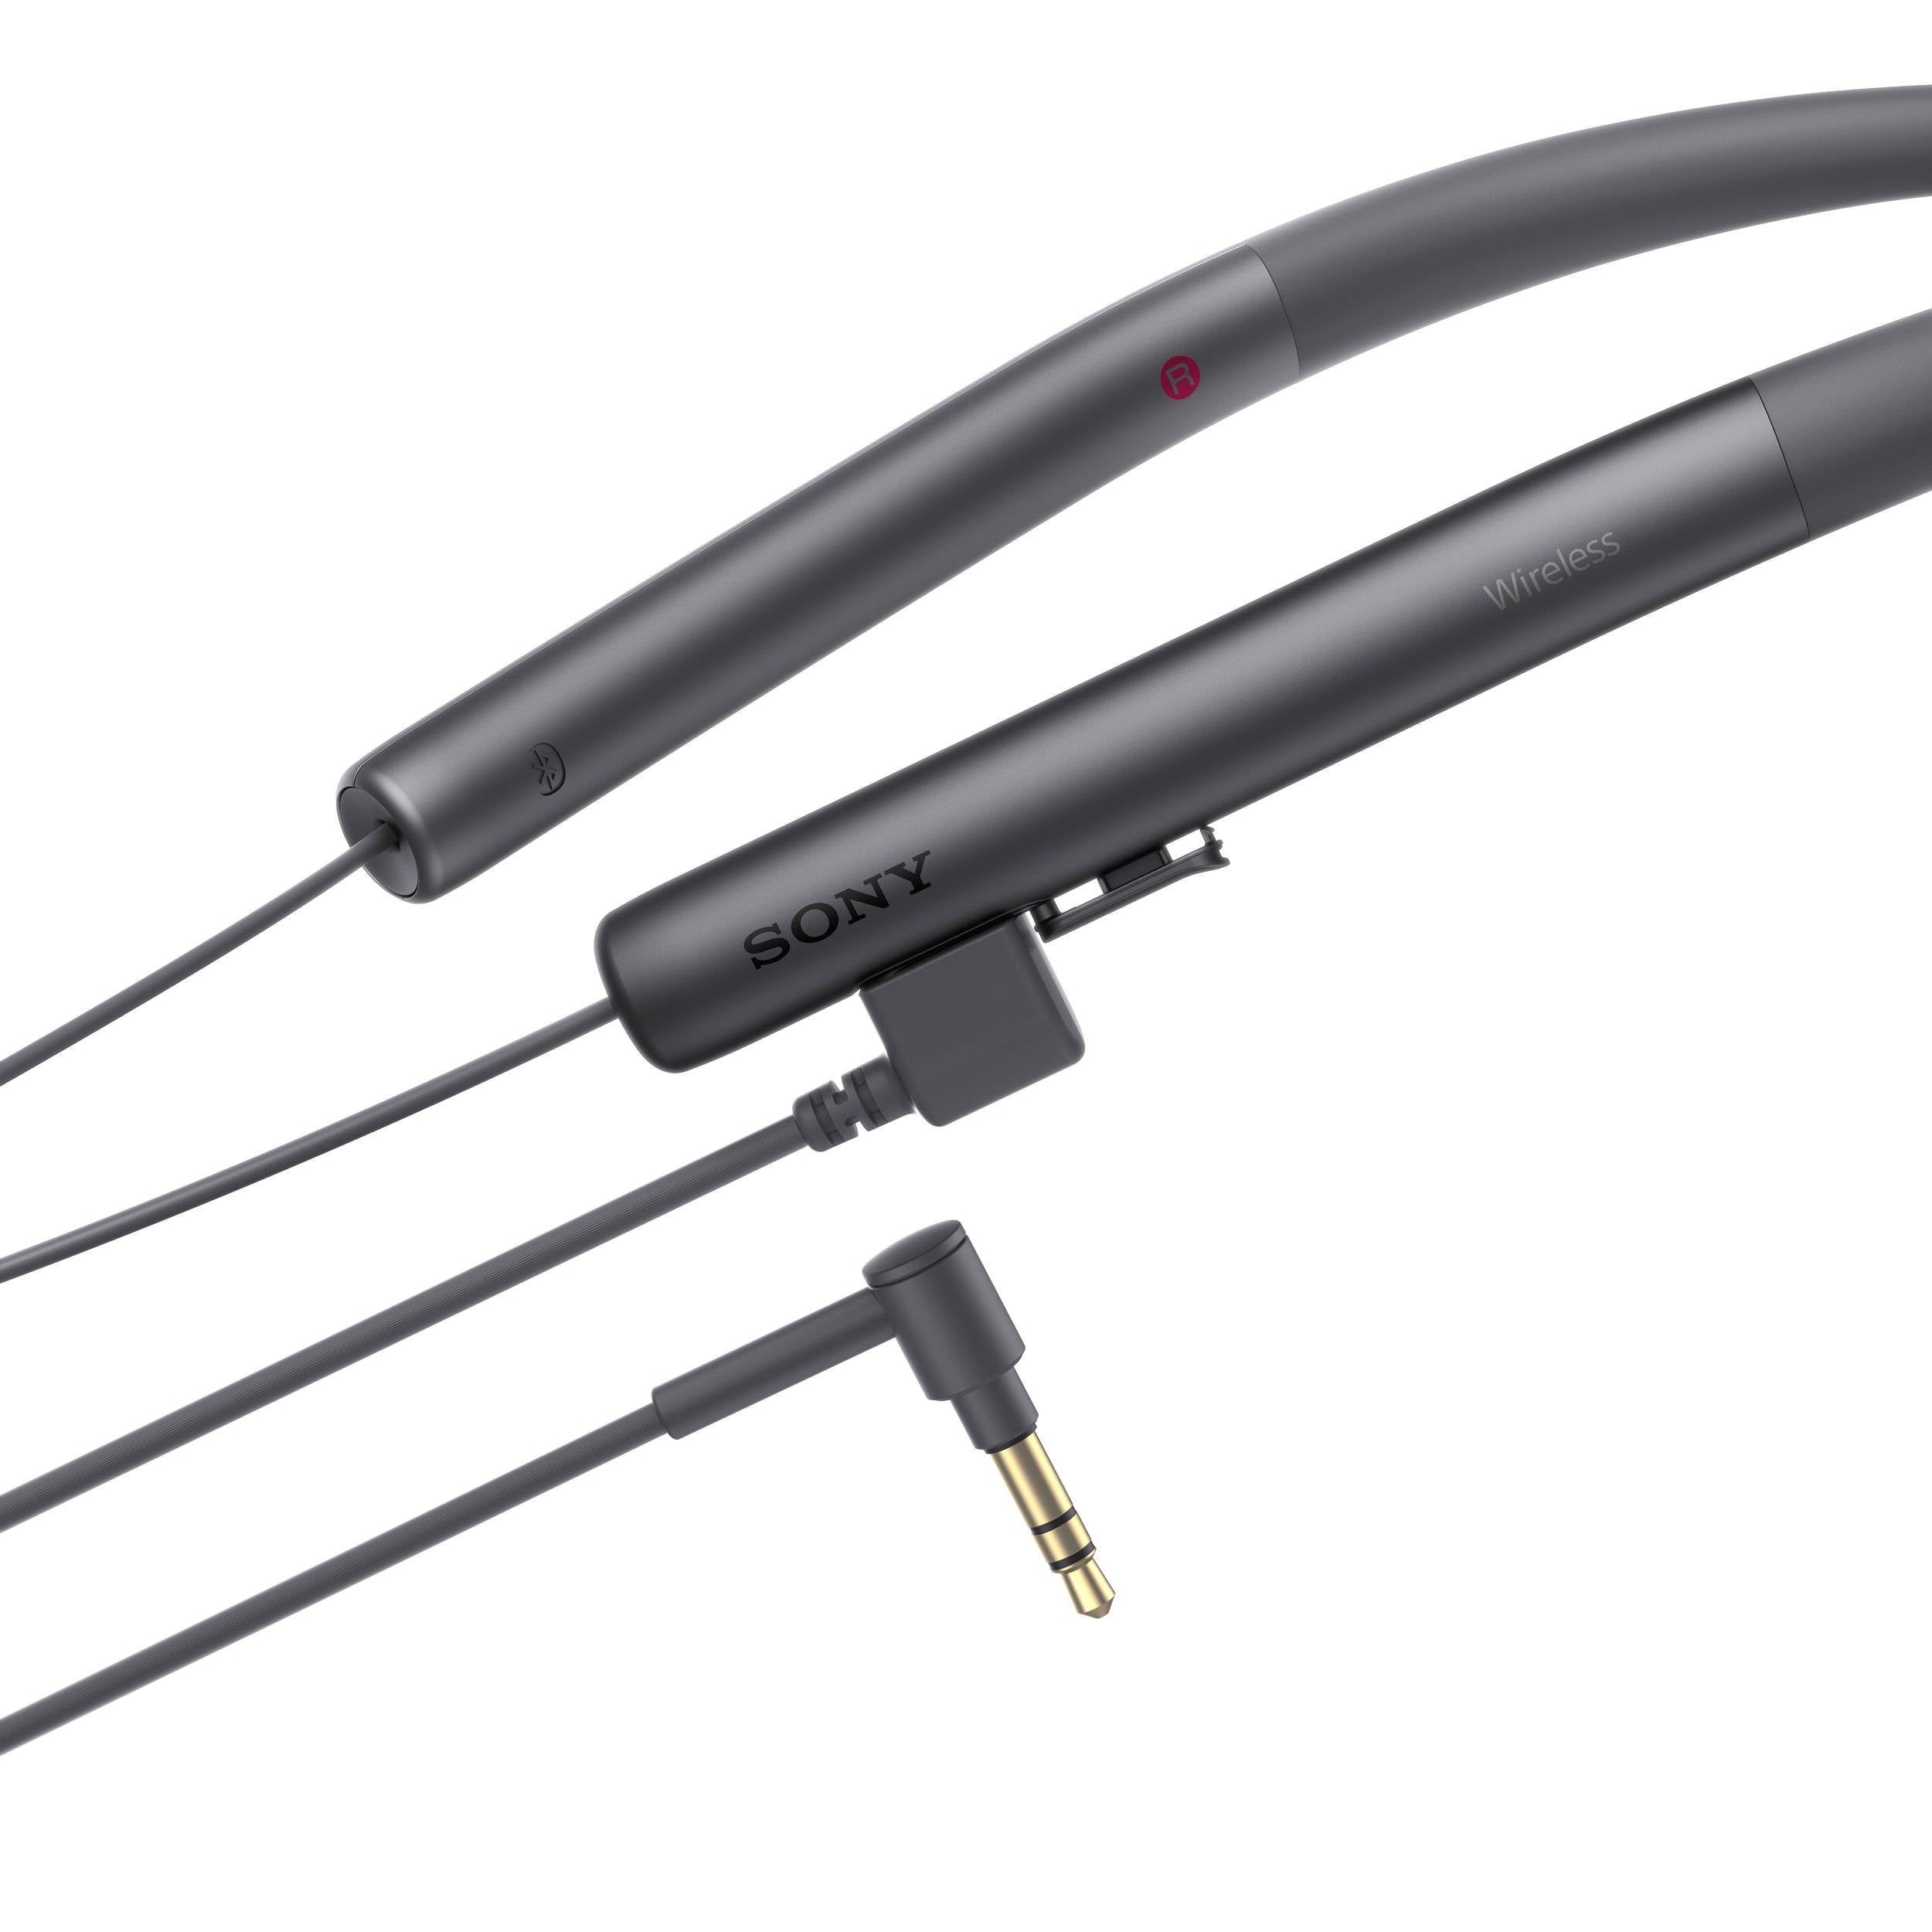 Sony MDR-EX750BT - Earphones with mic - in-ear - behind-the-neck mount - wireless - Bluetooth - NFC - charcoal black